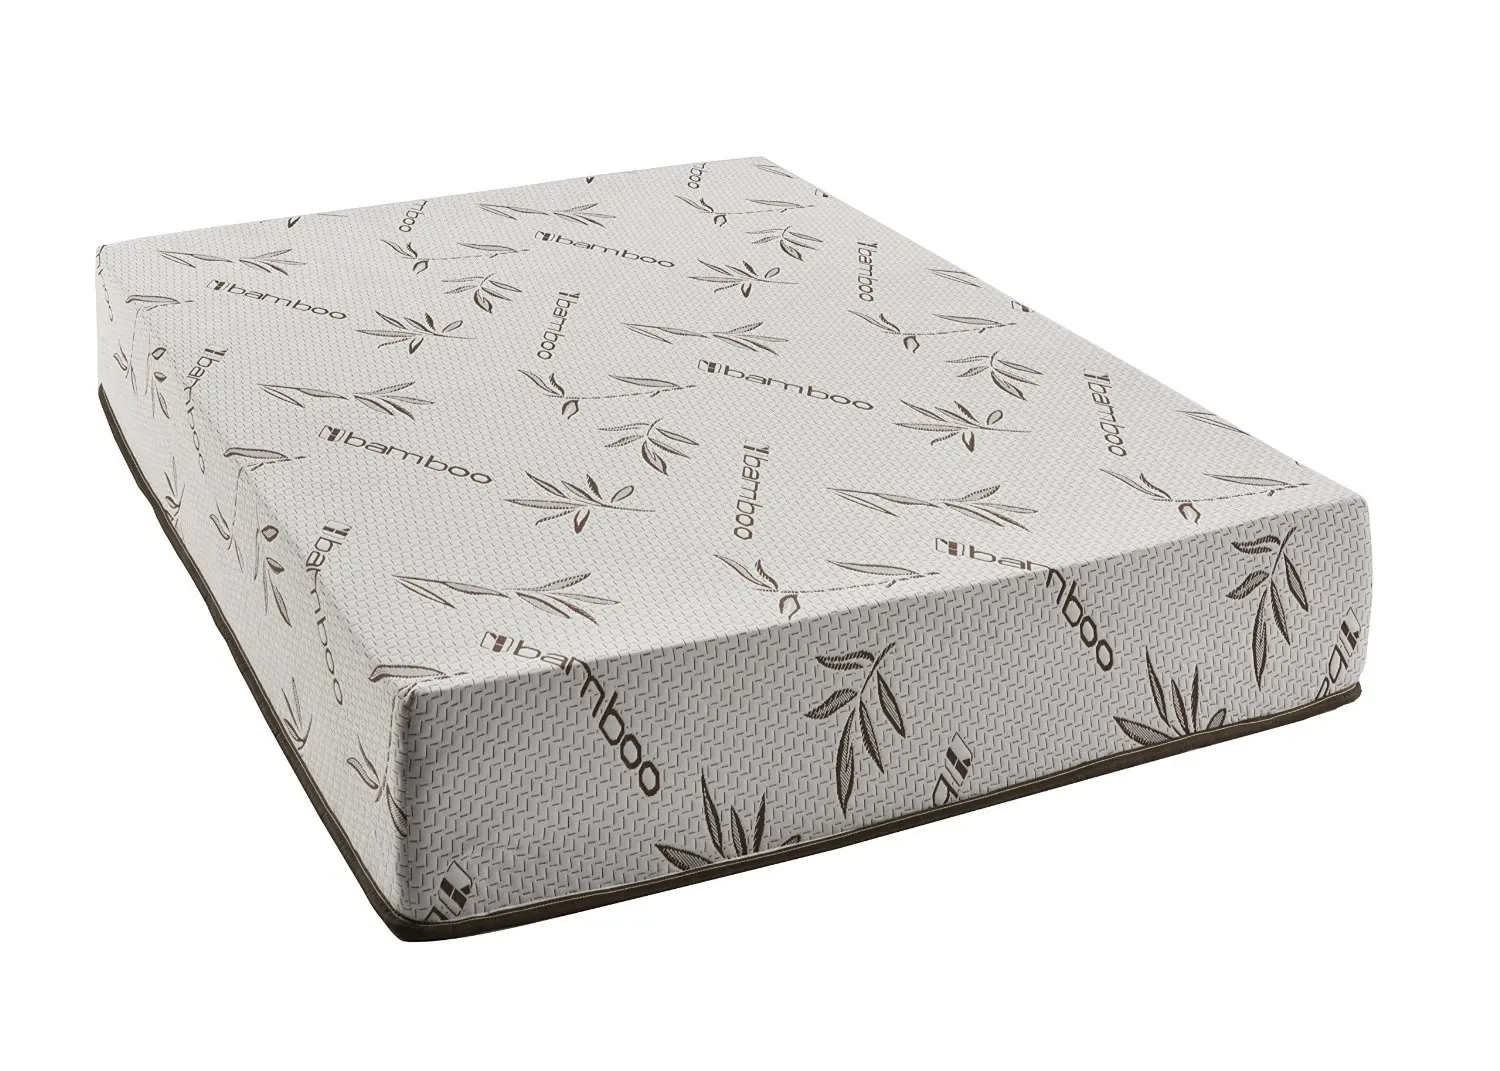 memory foam king mattress with hypoallergenic bamboo cover